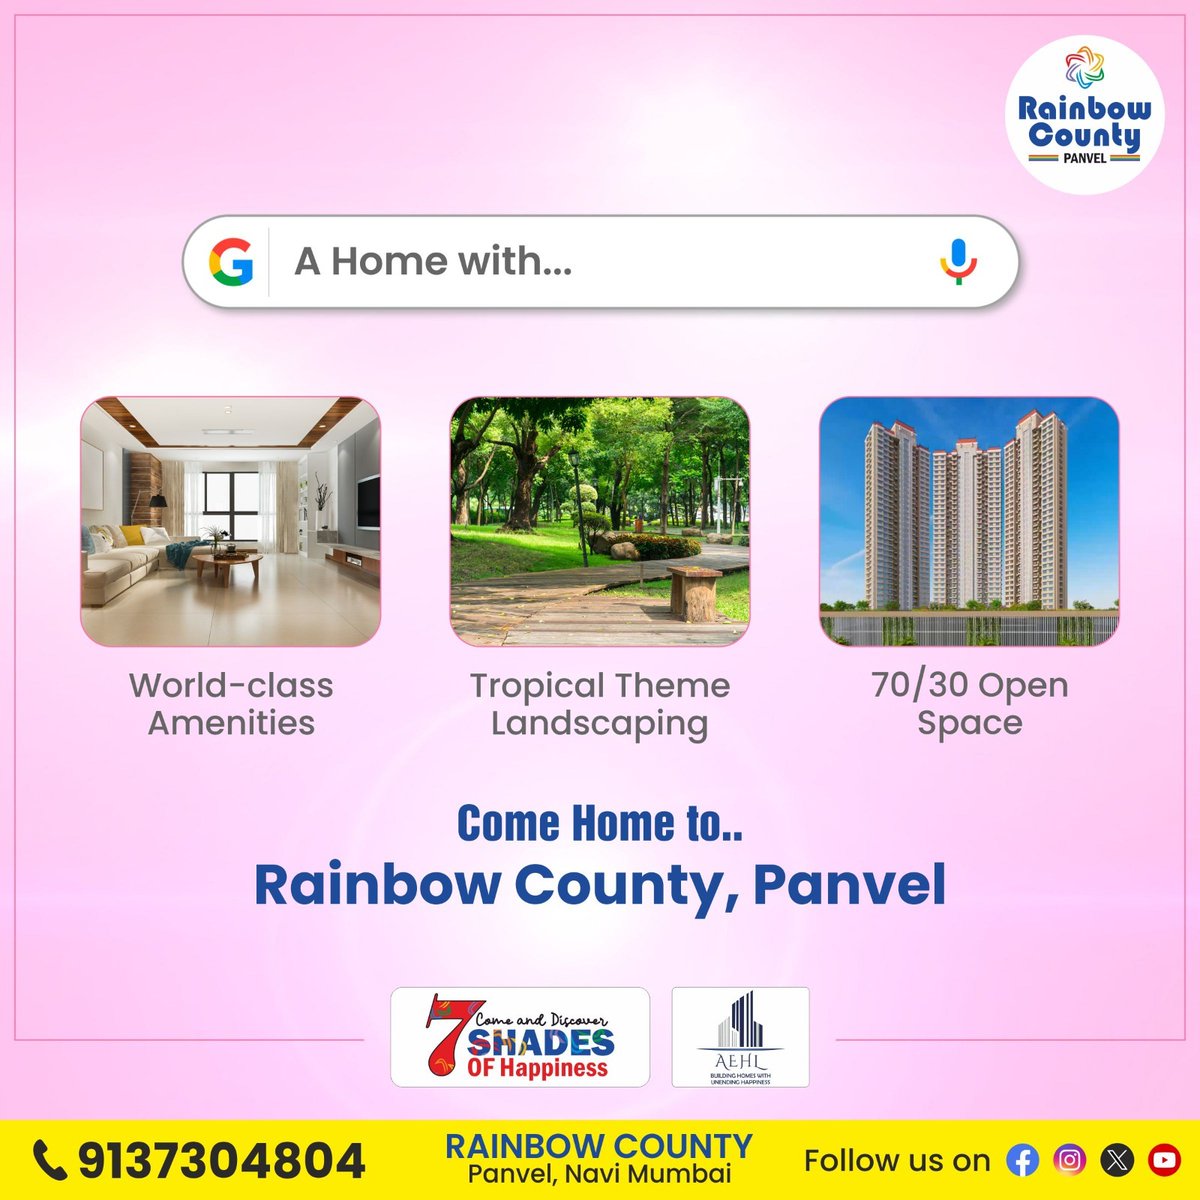 Rainbow County brings you homes with everything you need 

⚡ Premium Residences 2 BHK @ 79.99L All in*, 3 BHK @ 1.10CR  All in*  & Smart 4 BHK @ 1.50 Cr All in. 🏡🏡 For more information, call - 9137304804 ☎️.
#DreamHomes #AEHL #BookNow #HomeSweetHome #RainbowCounty #Panvel